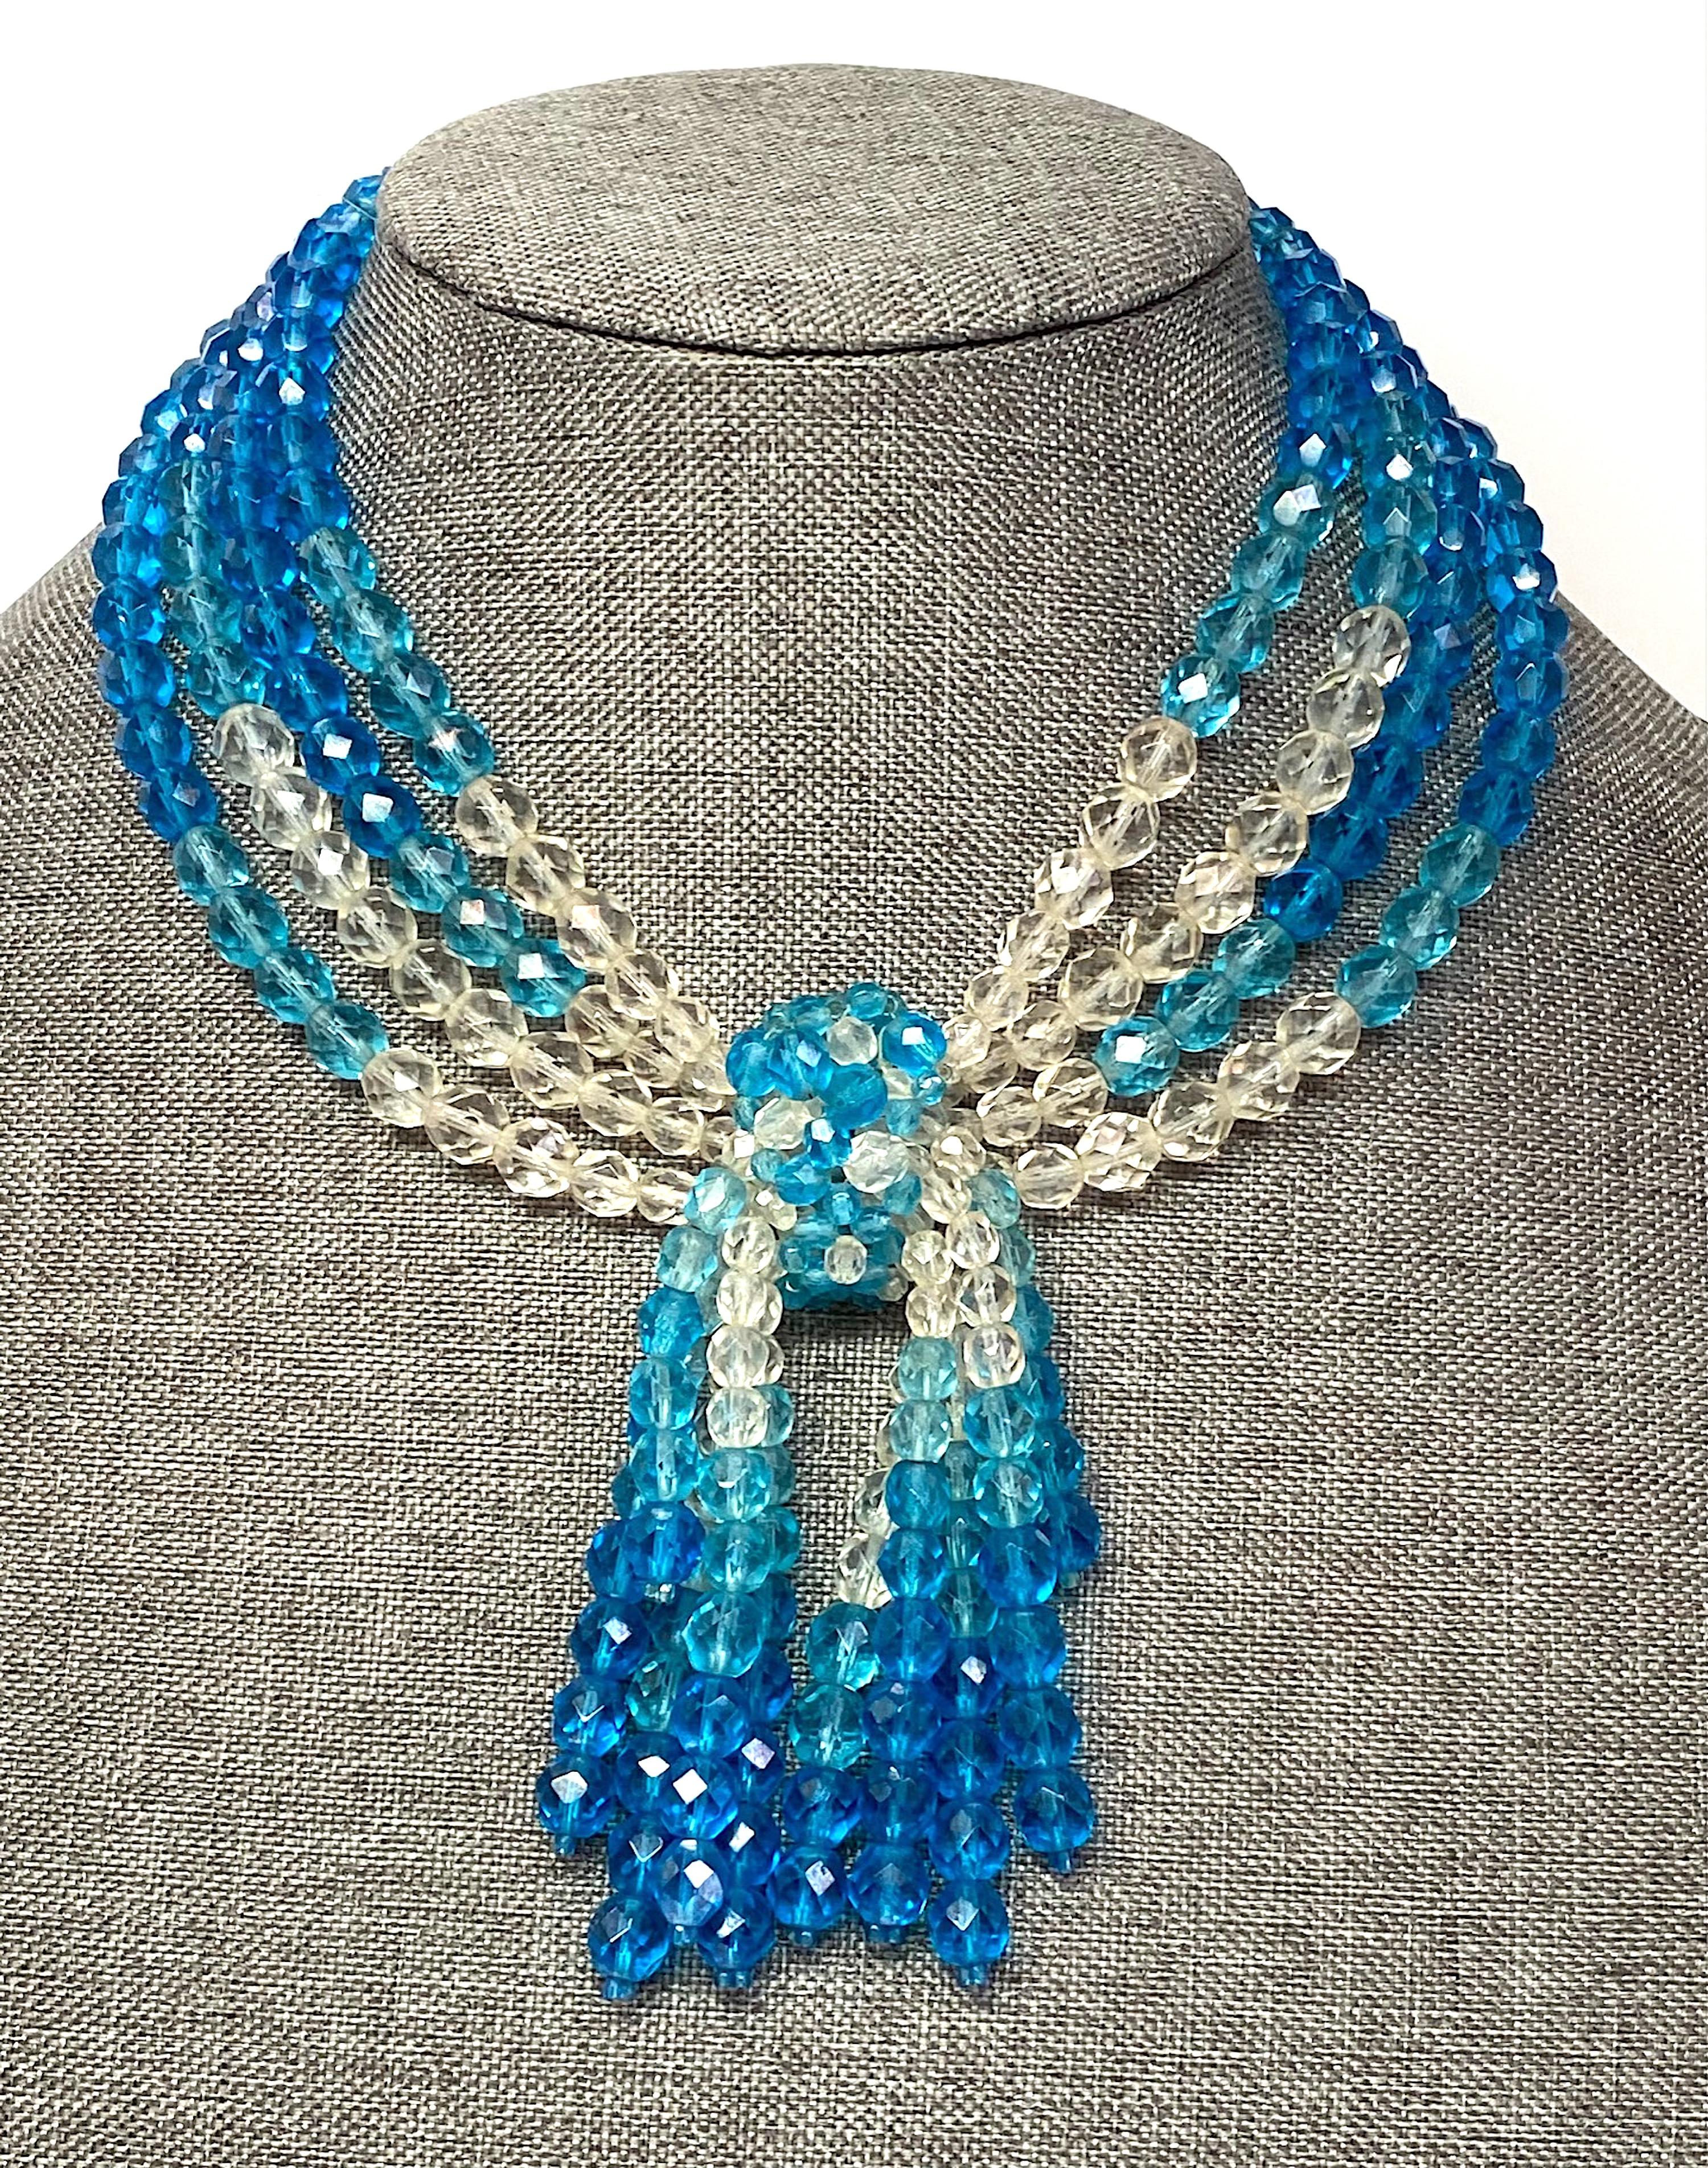 A lovely 1950s necklace by the famous Italian jewelry designers Bruno and Lyda Coppola. The necklace is comprised of hand strung clear, light and royal blue faceted crystal bead. Each side of the necklace has four strands meaning at the triangular